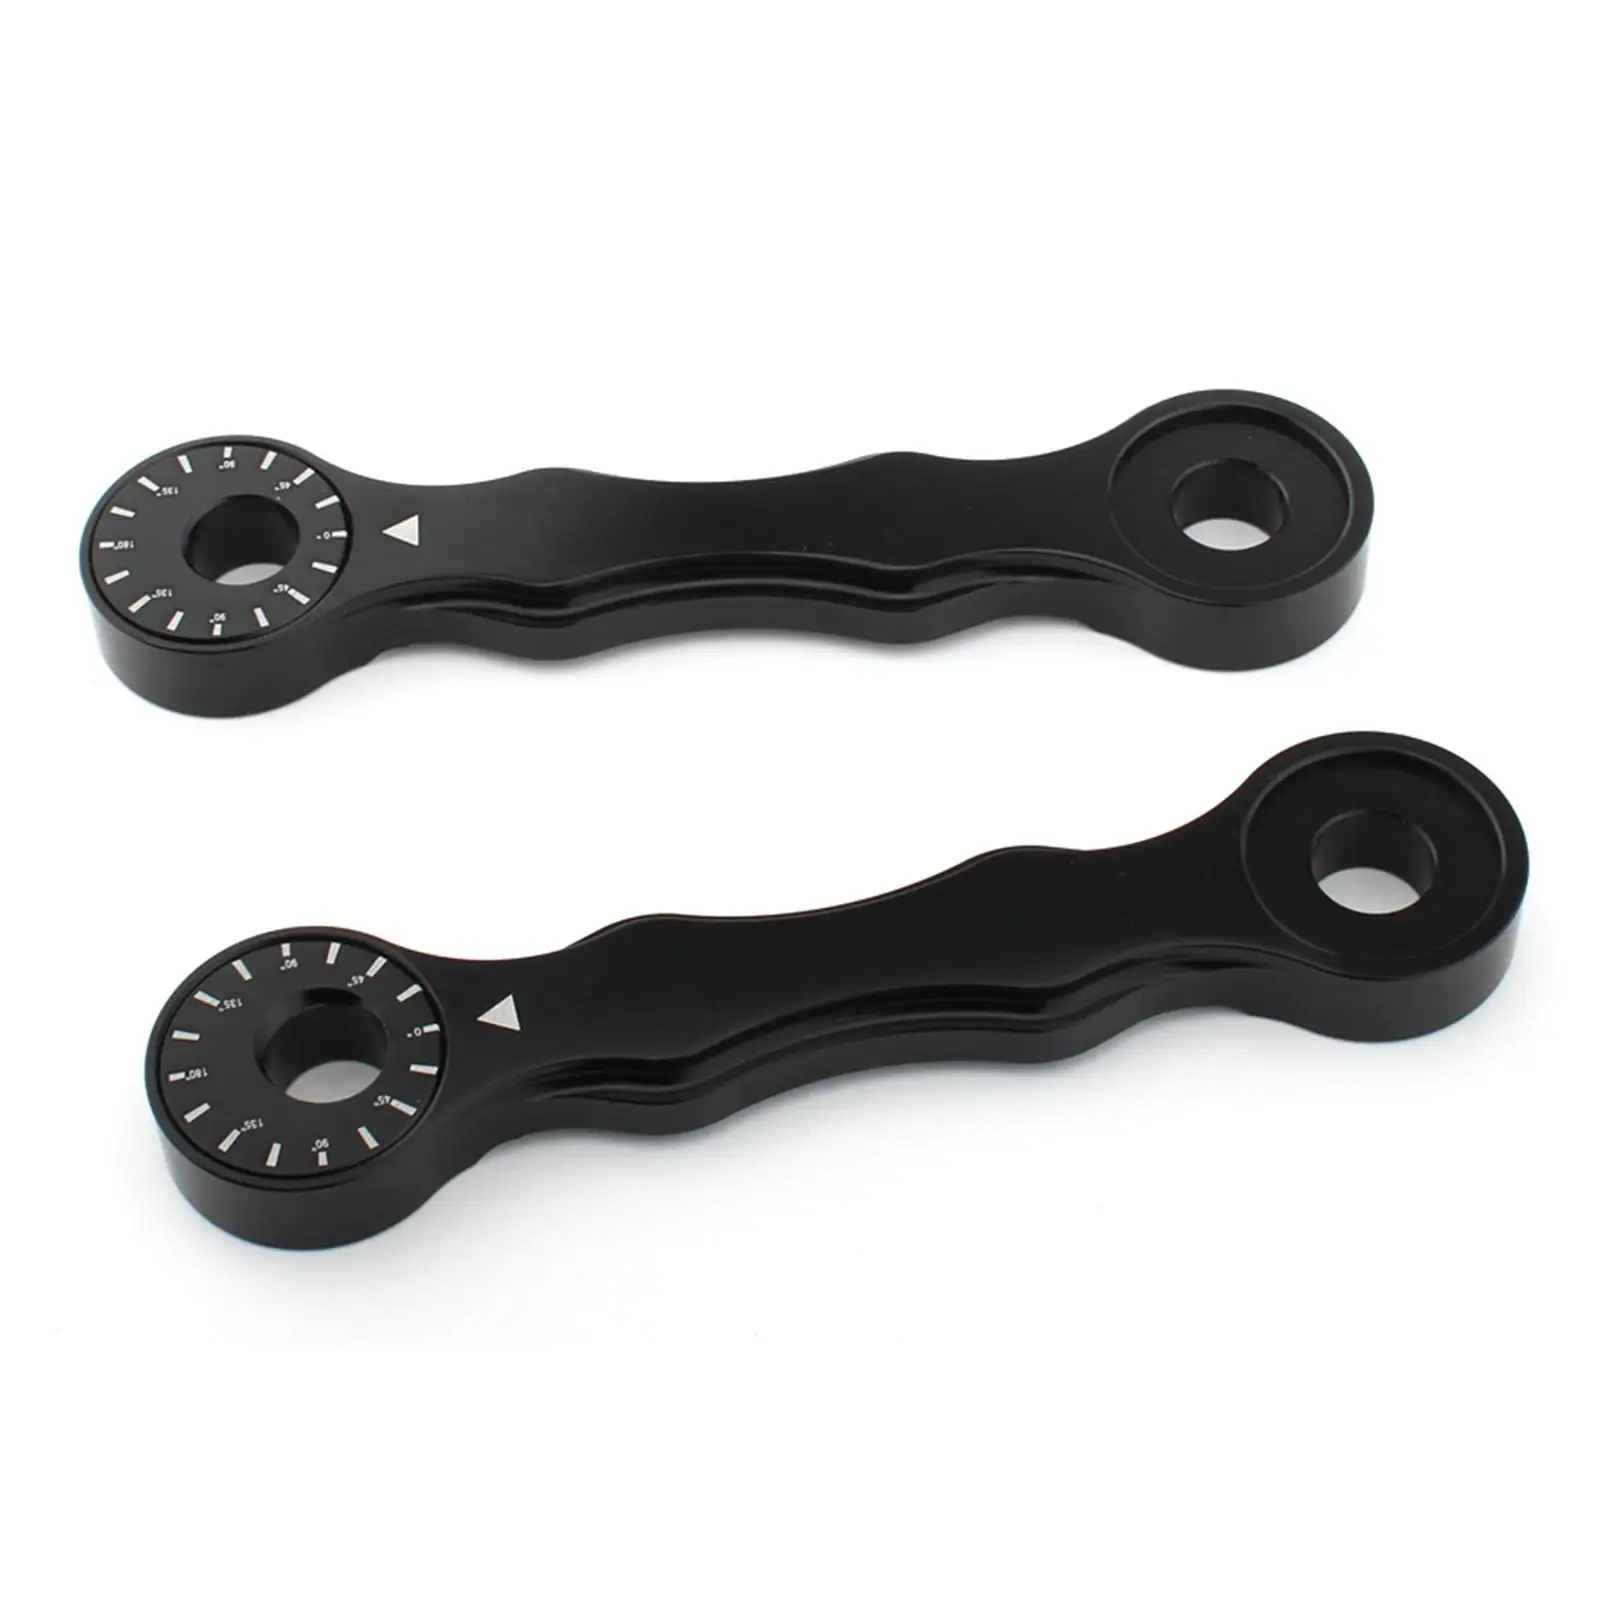 2x Motorcycle Lowering Links set Black replace parts for Suzuki RM125 200